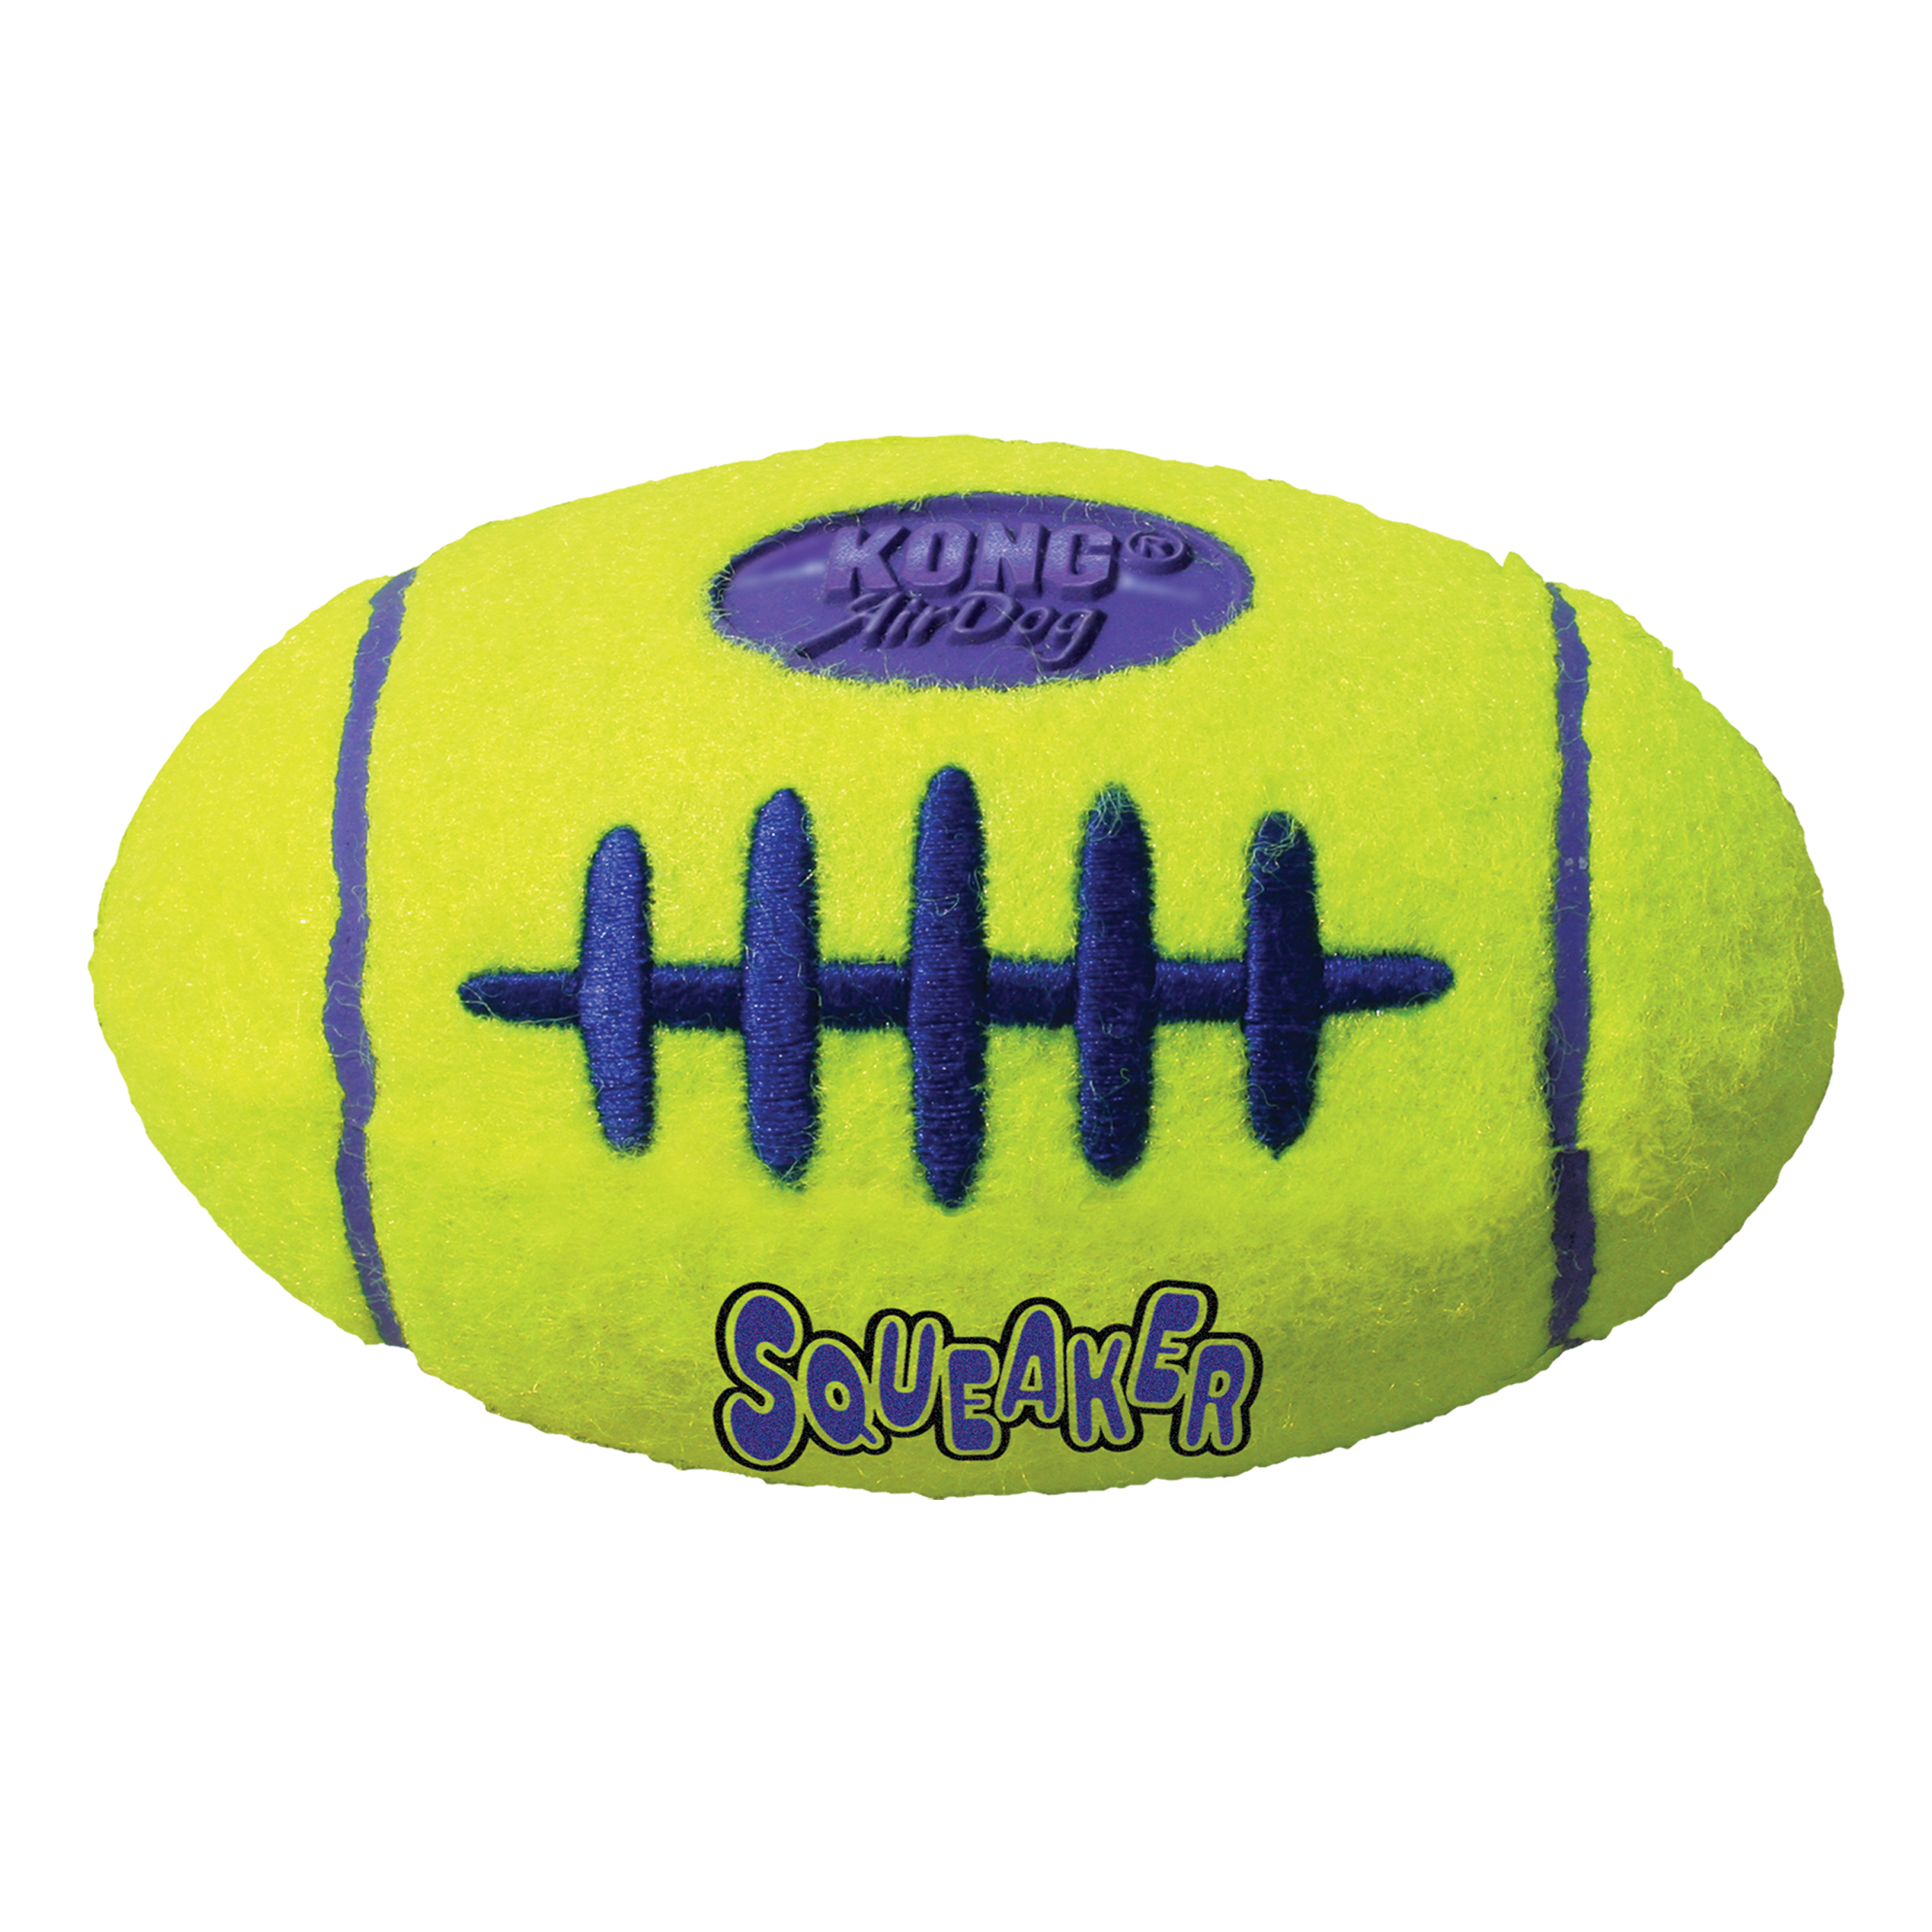 AirDog Squeaker Football offpack product image